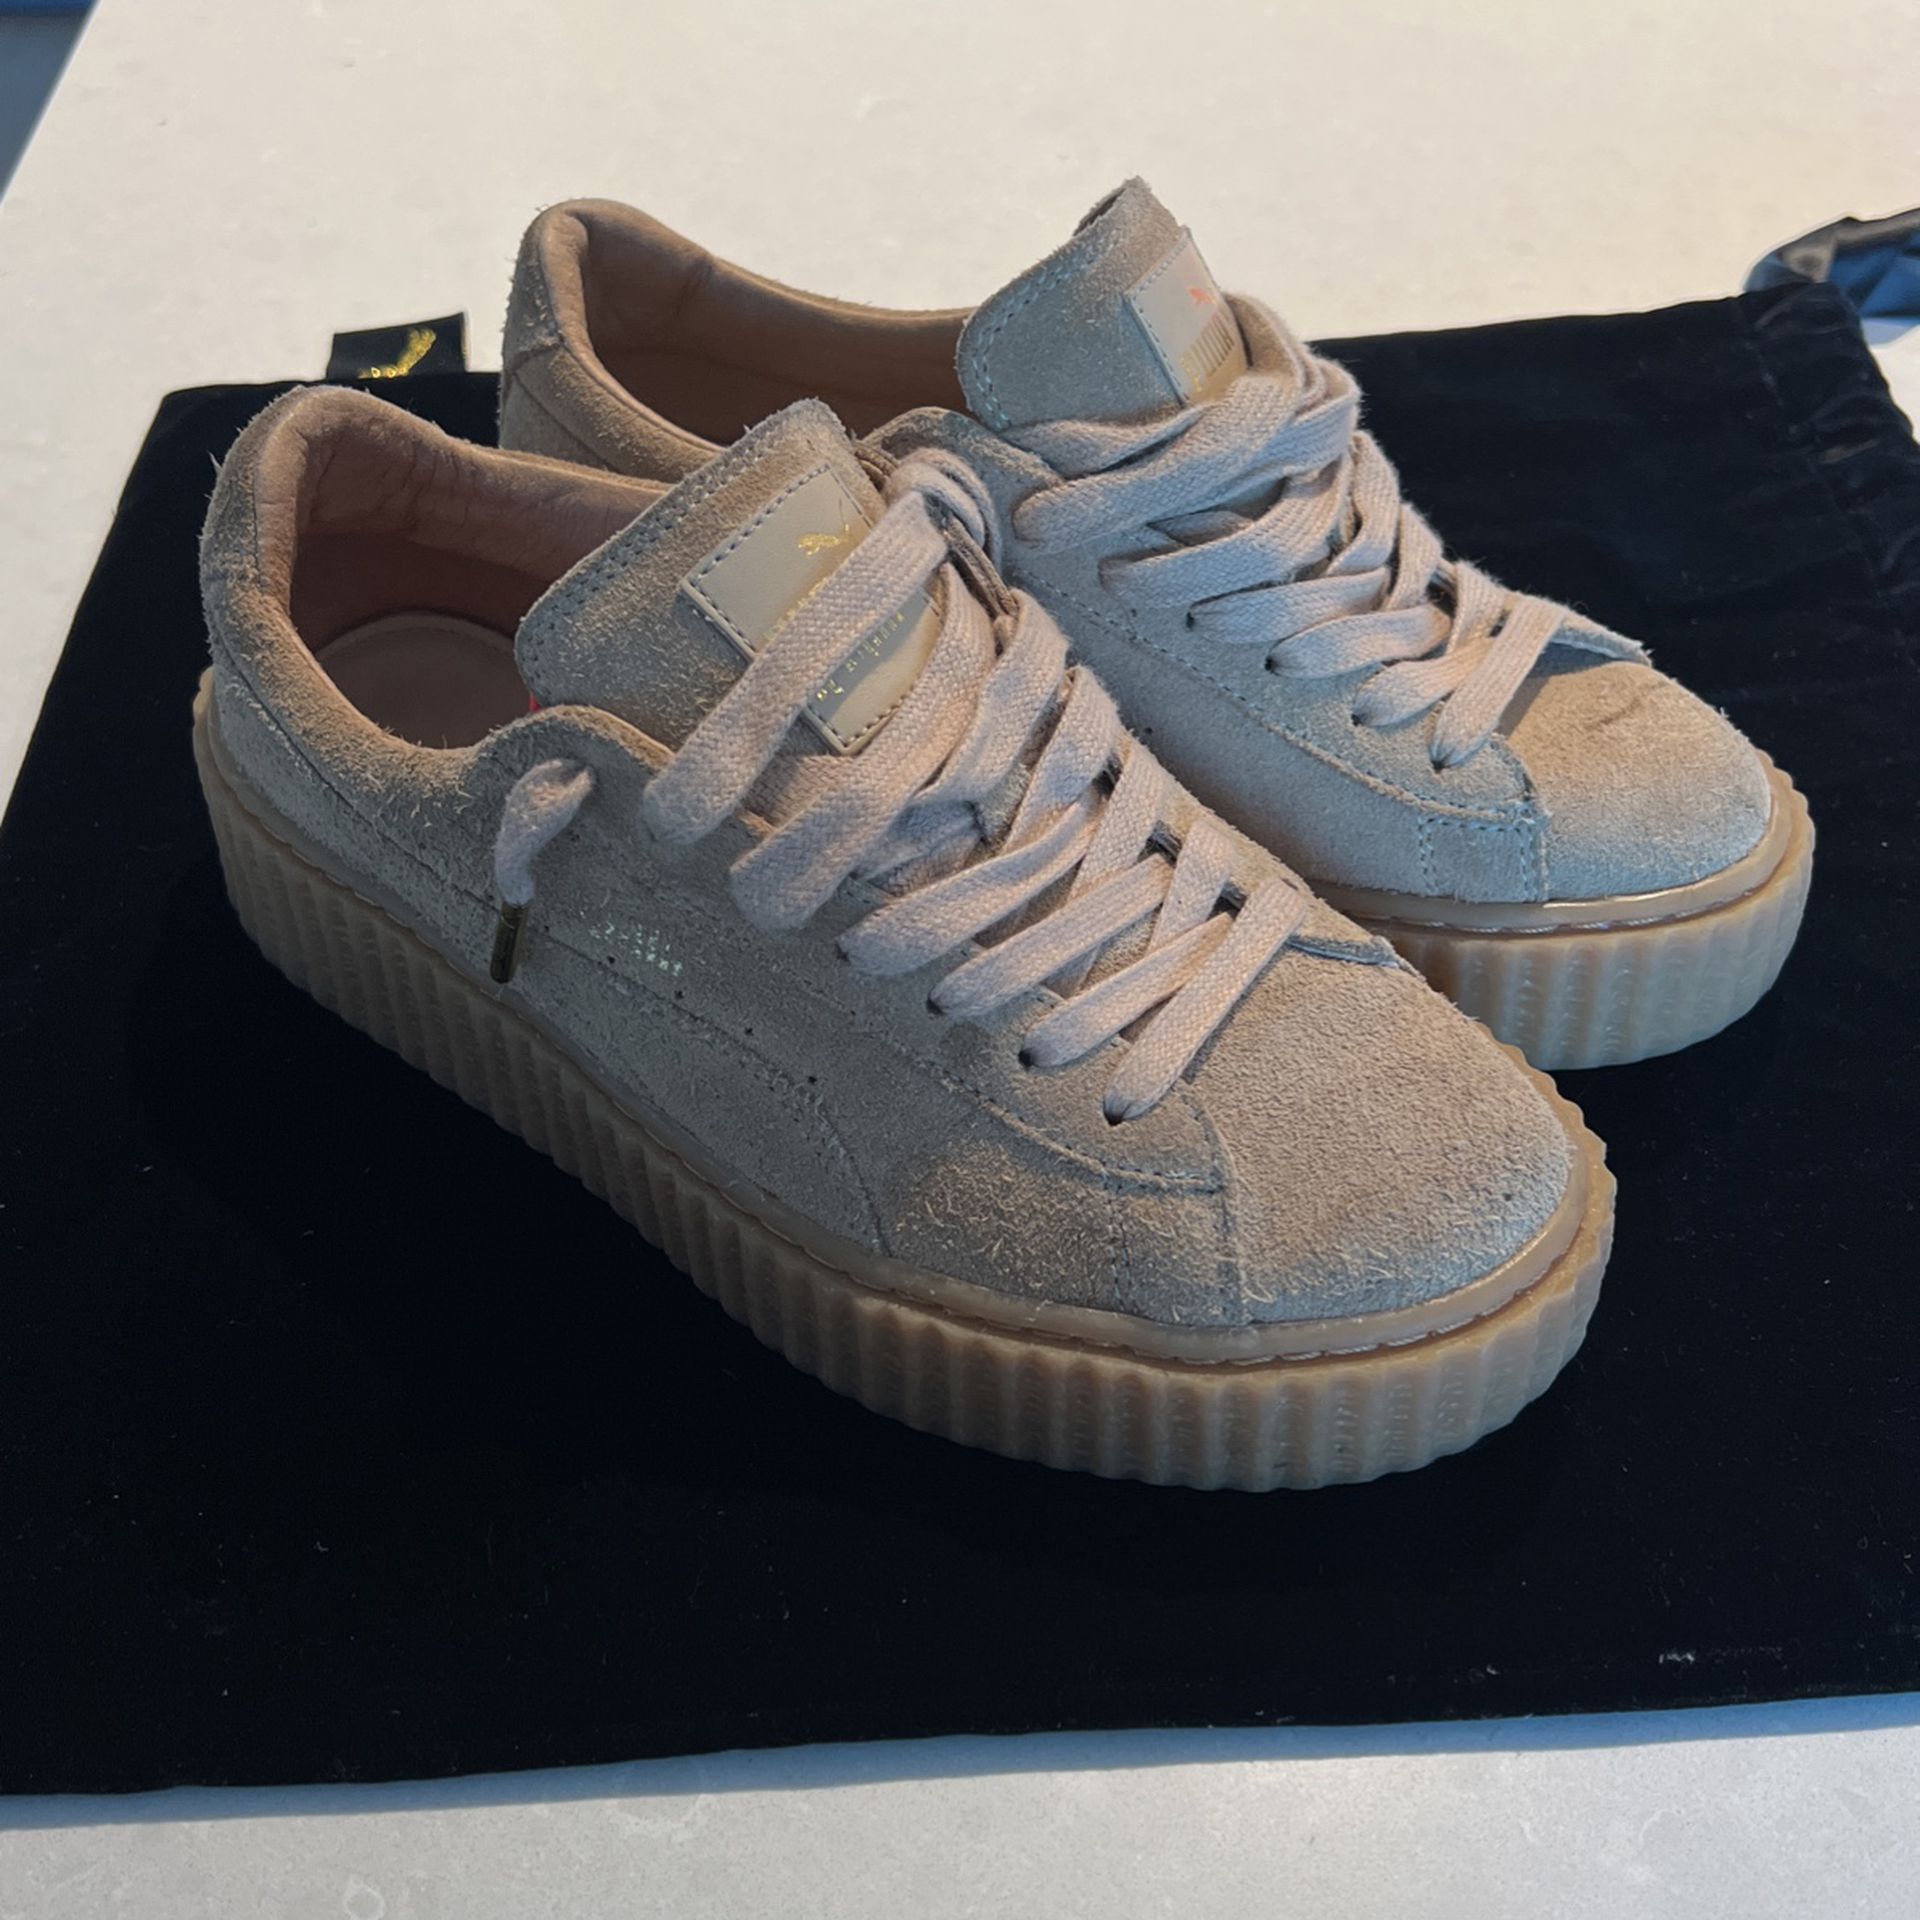 x Fenty Rihanna Creepers Oatmeal in Queens, NY - OfferUp